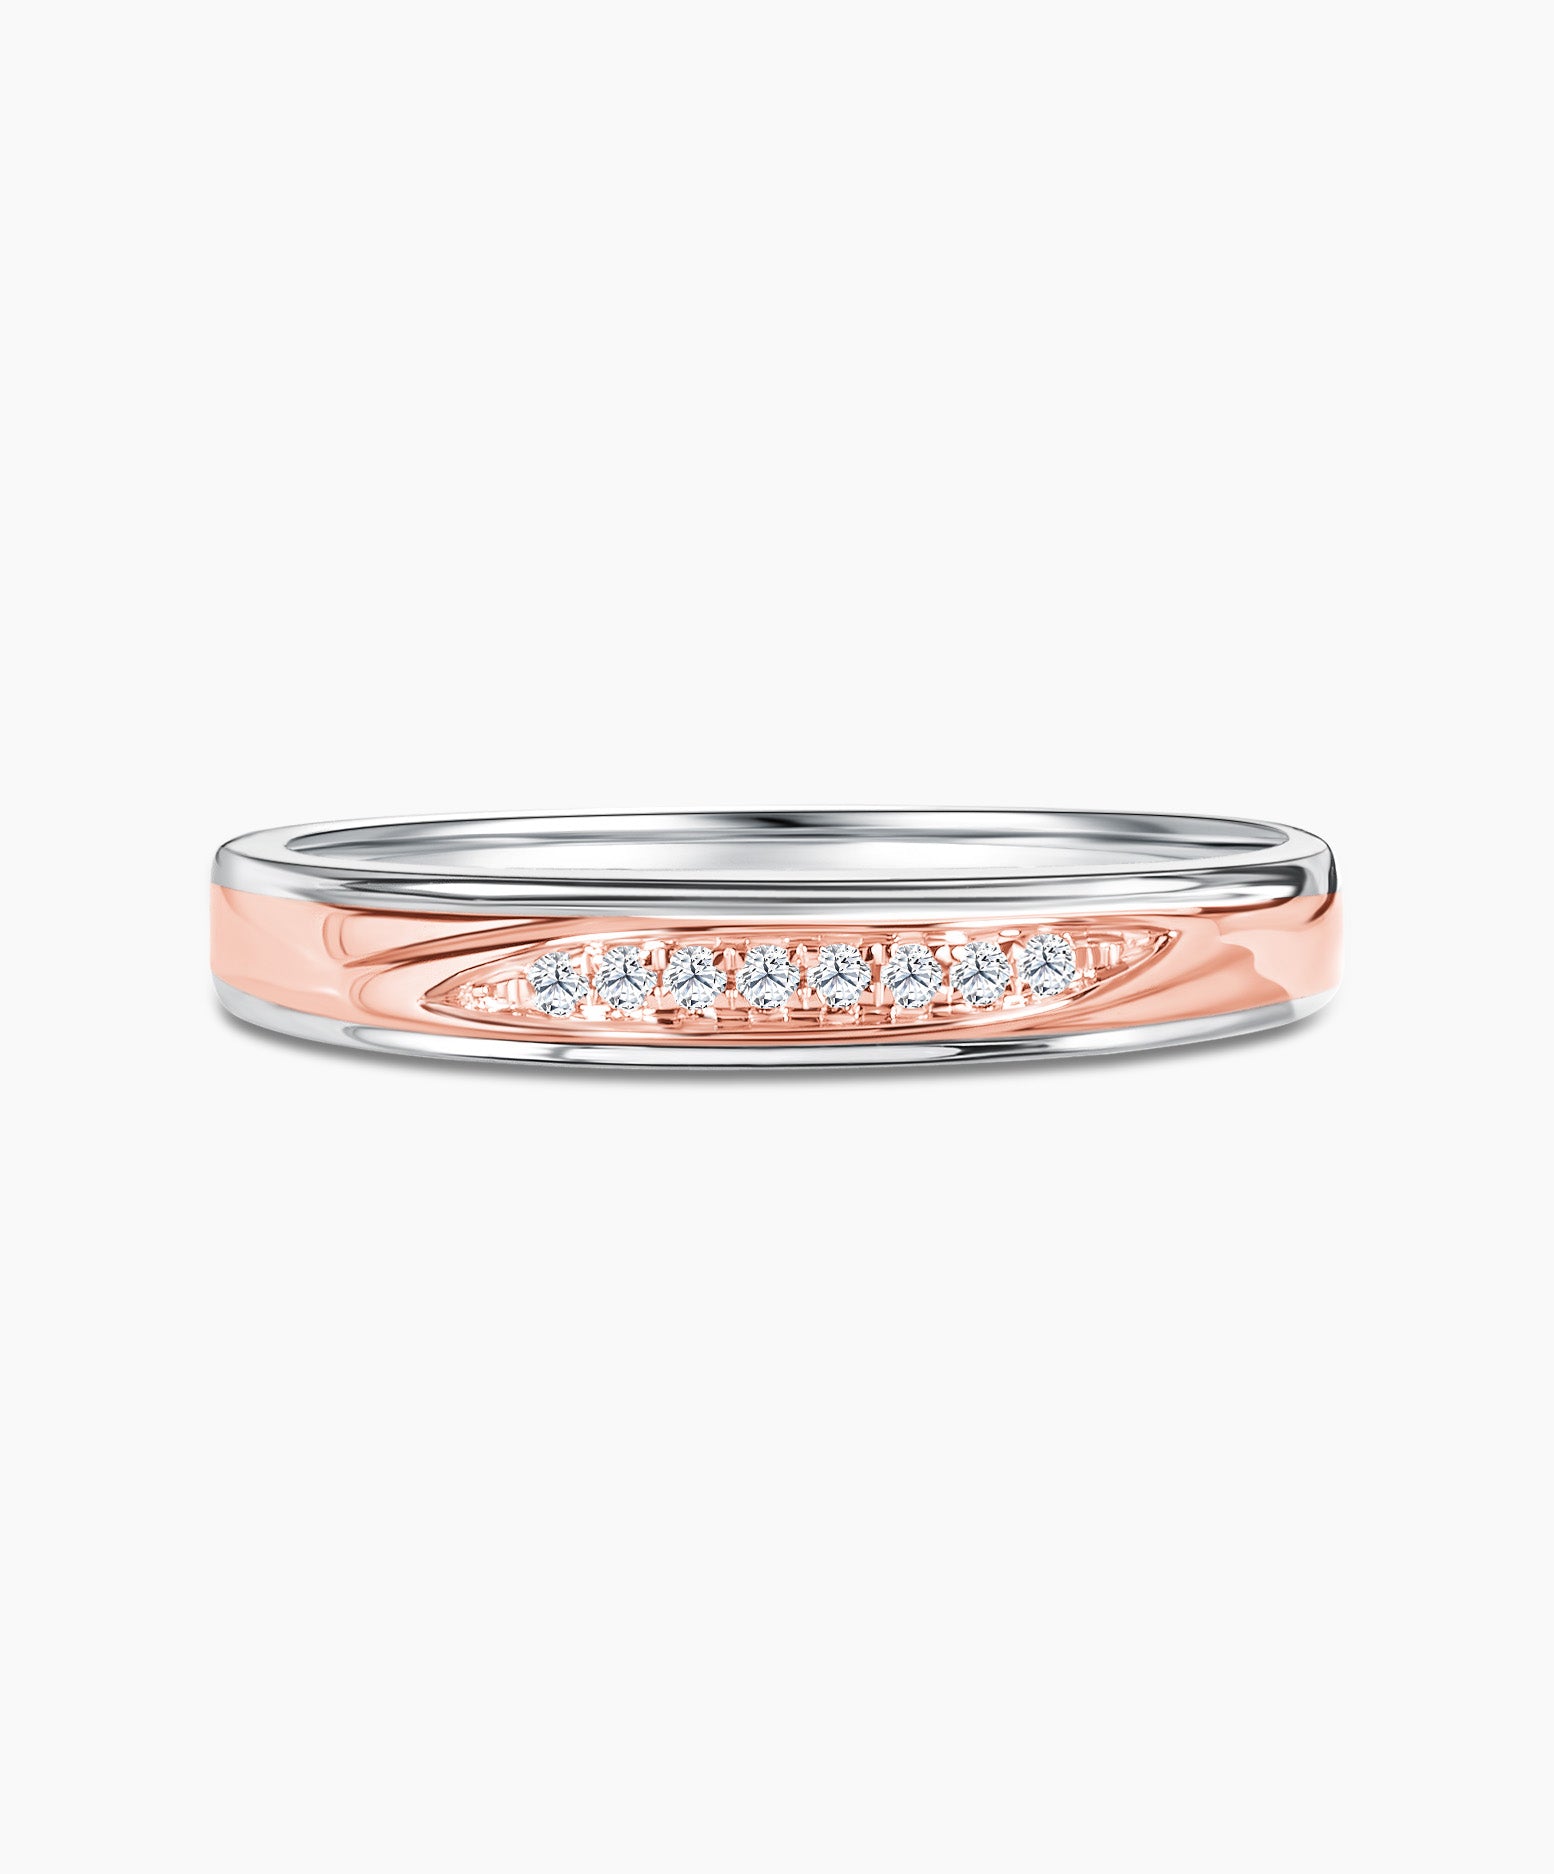 LVC Tresor Brilliant Diamonds Wedding Band in White Gold with Rose Gold Band